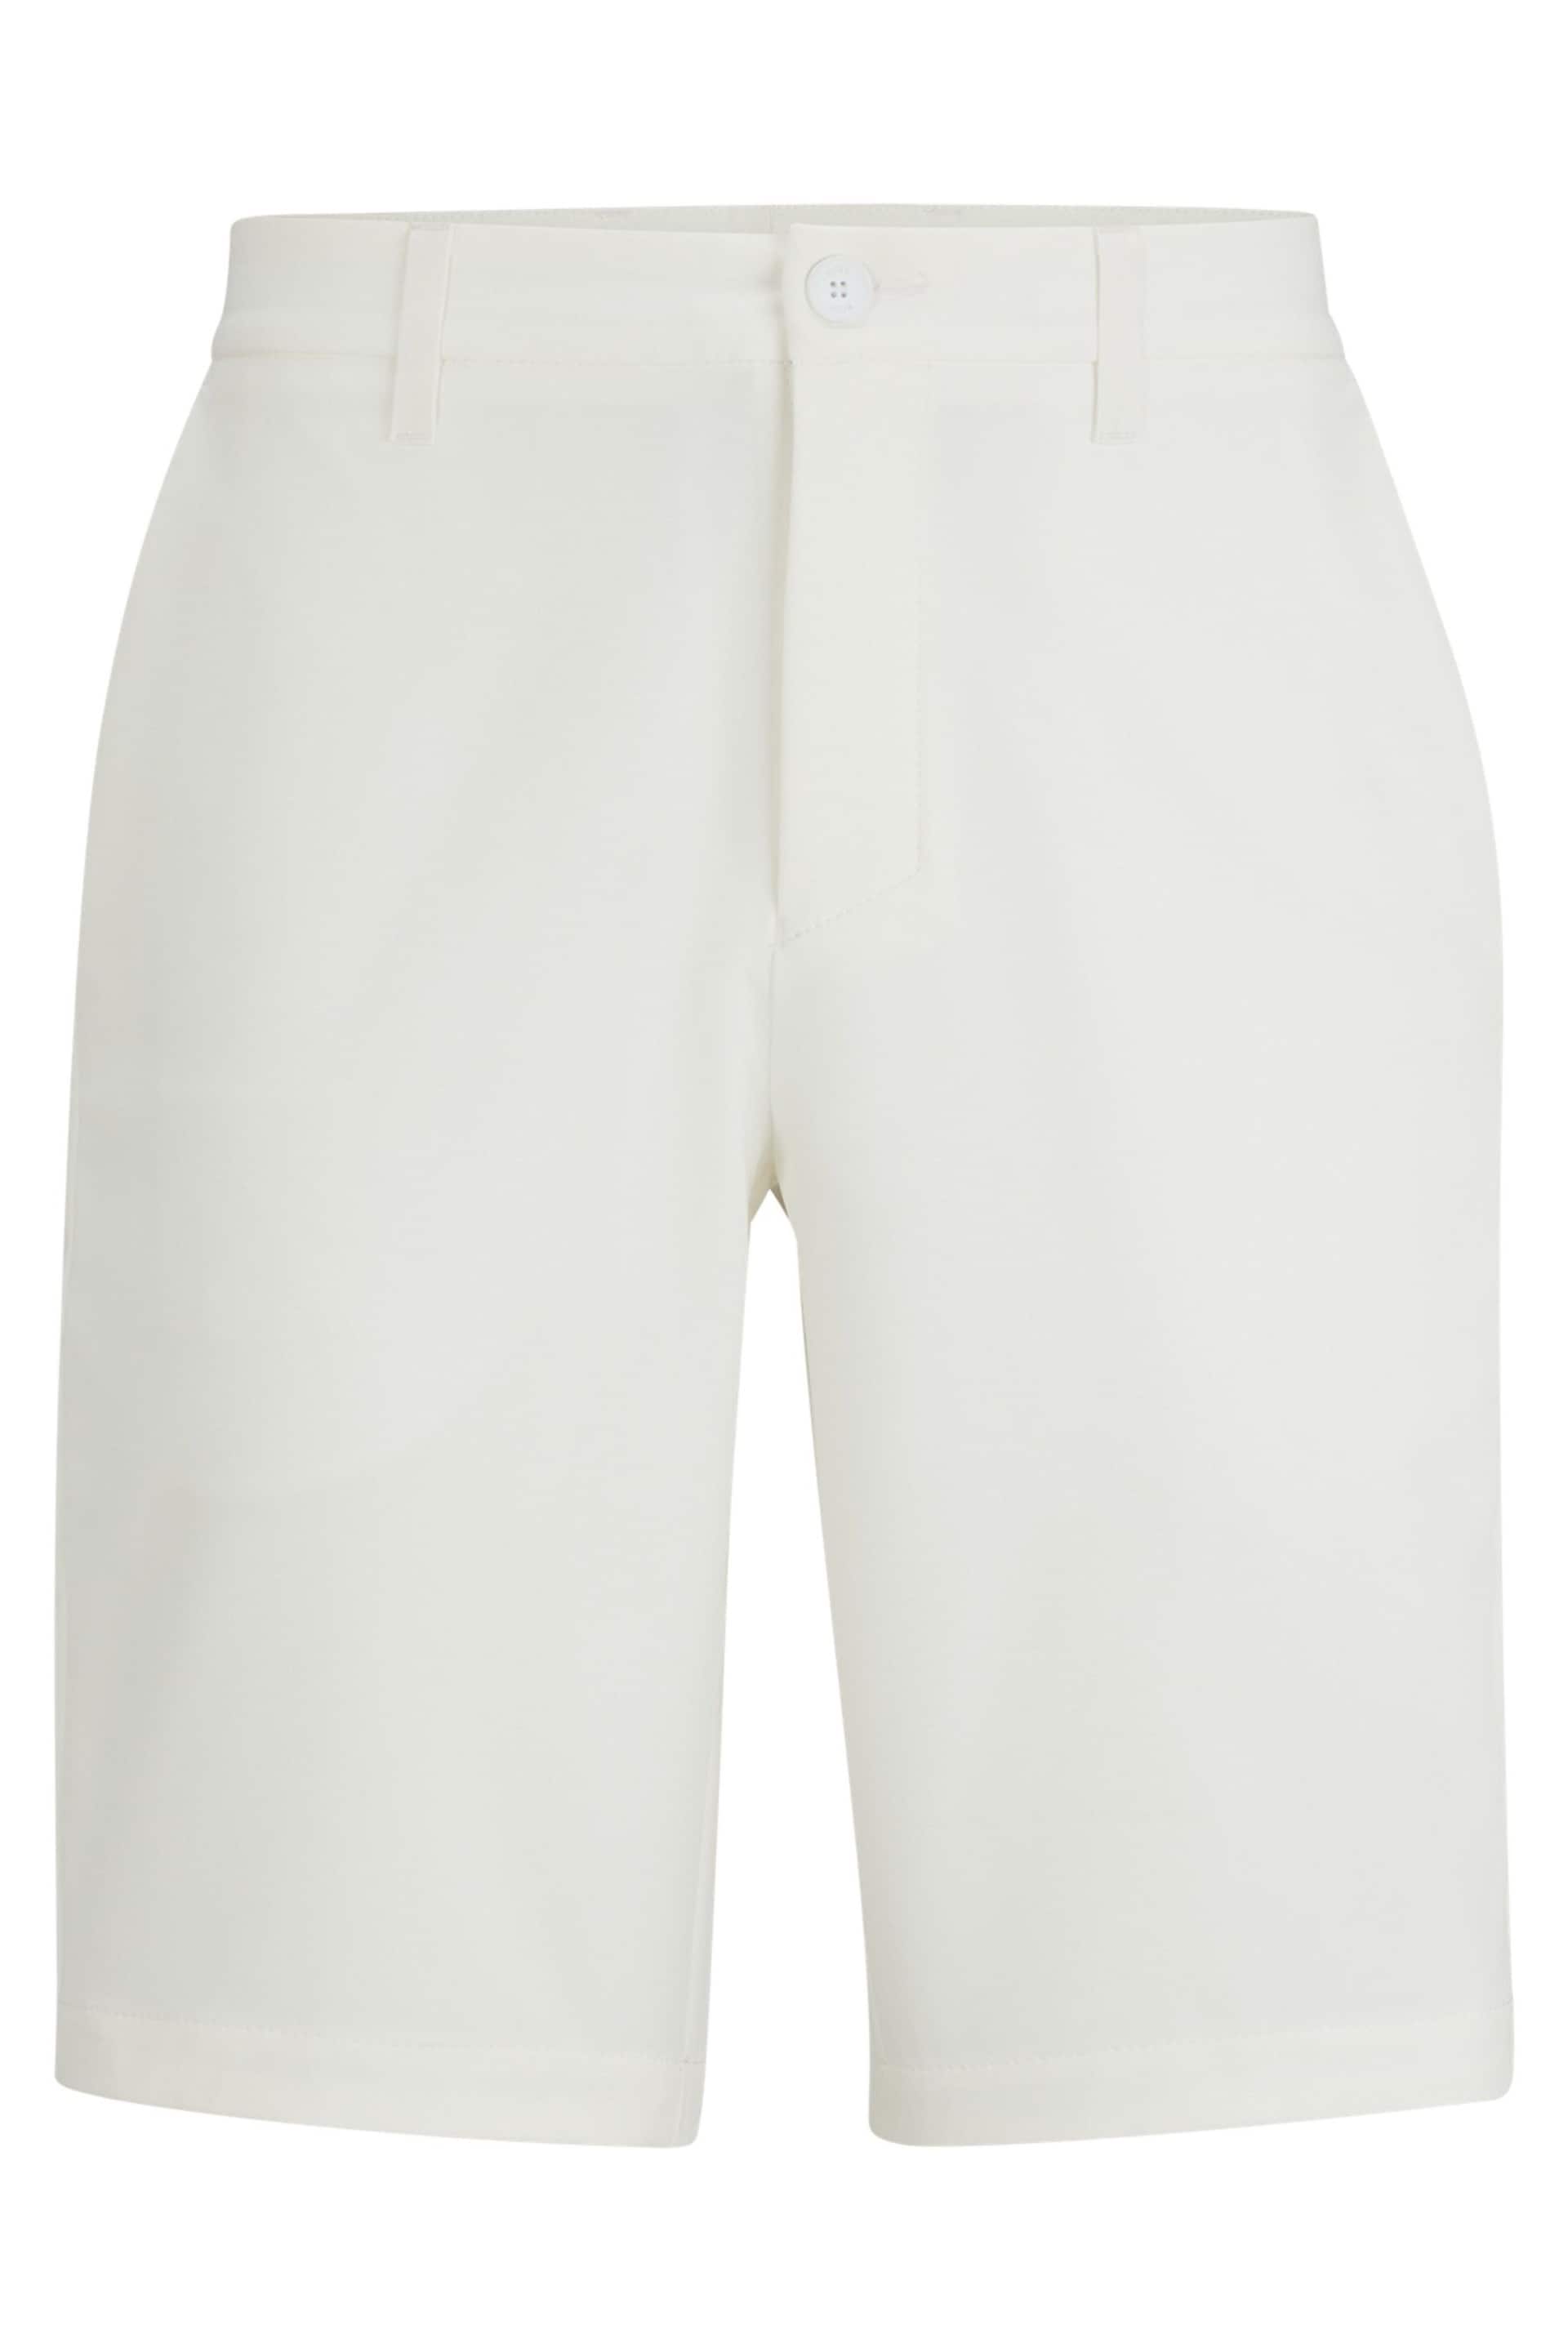 BOSS White Slim-Fit Shorts in Water-Repellent Easy-Iron Fabric - Image 5 of 5